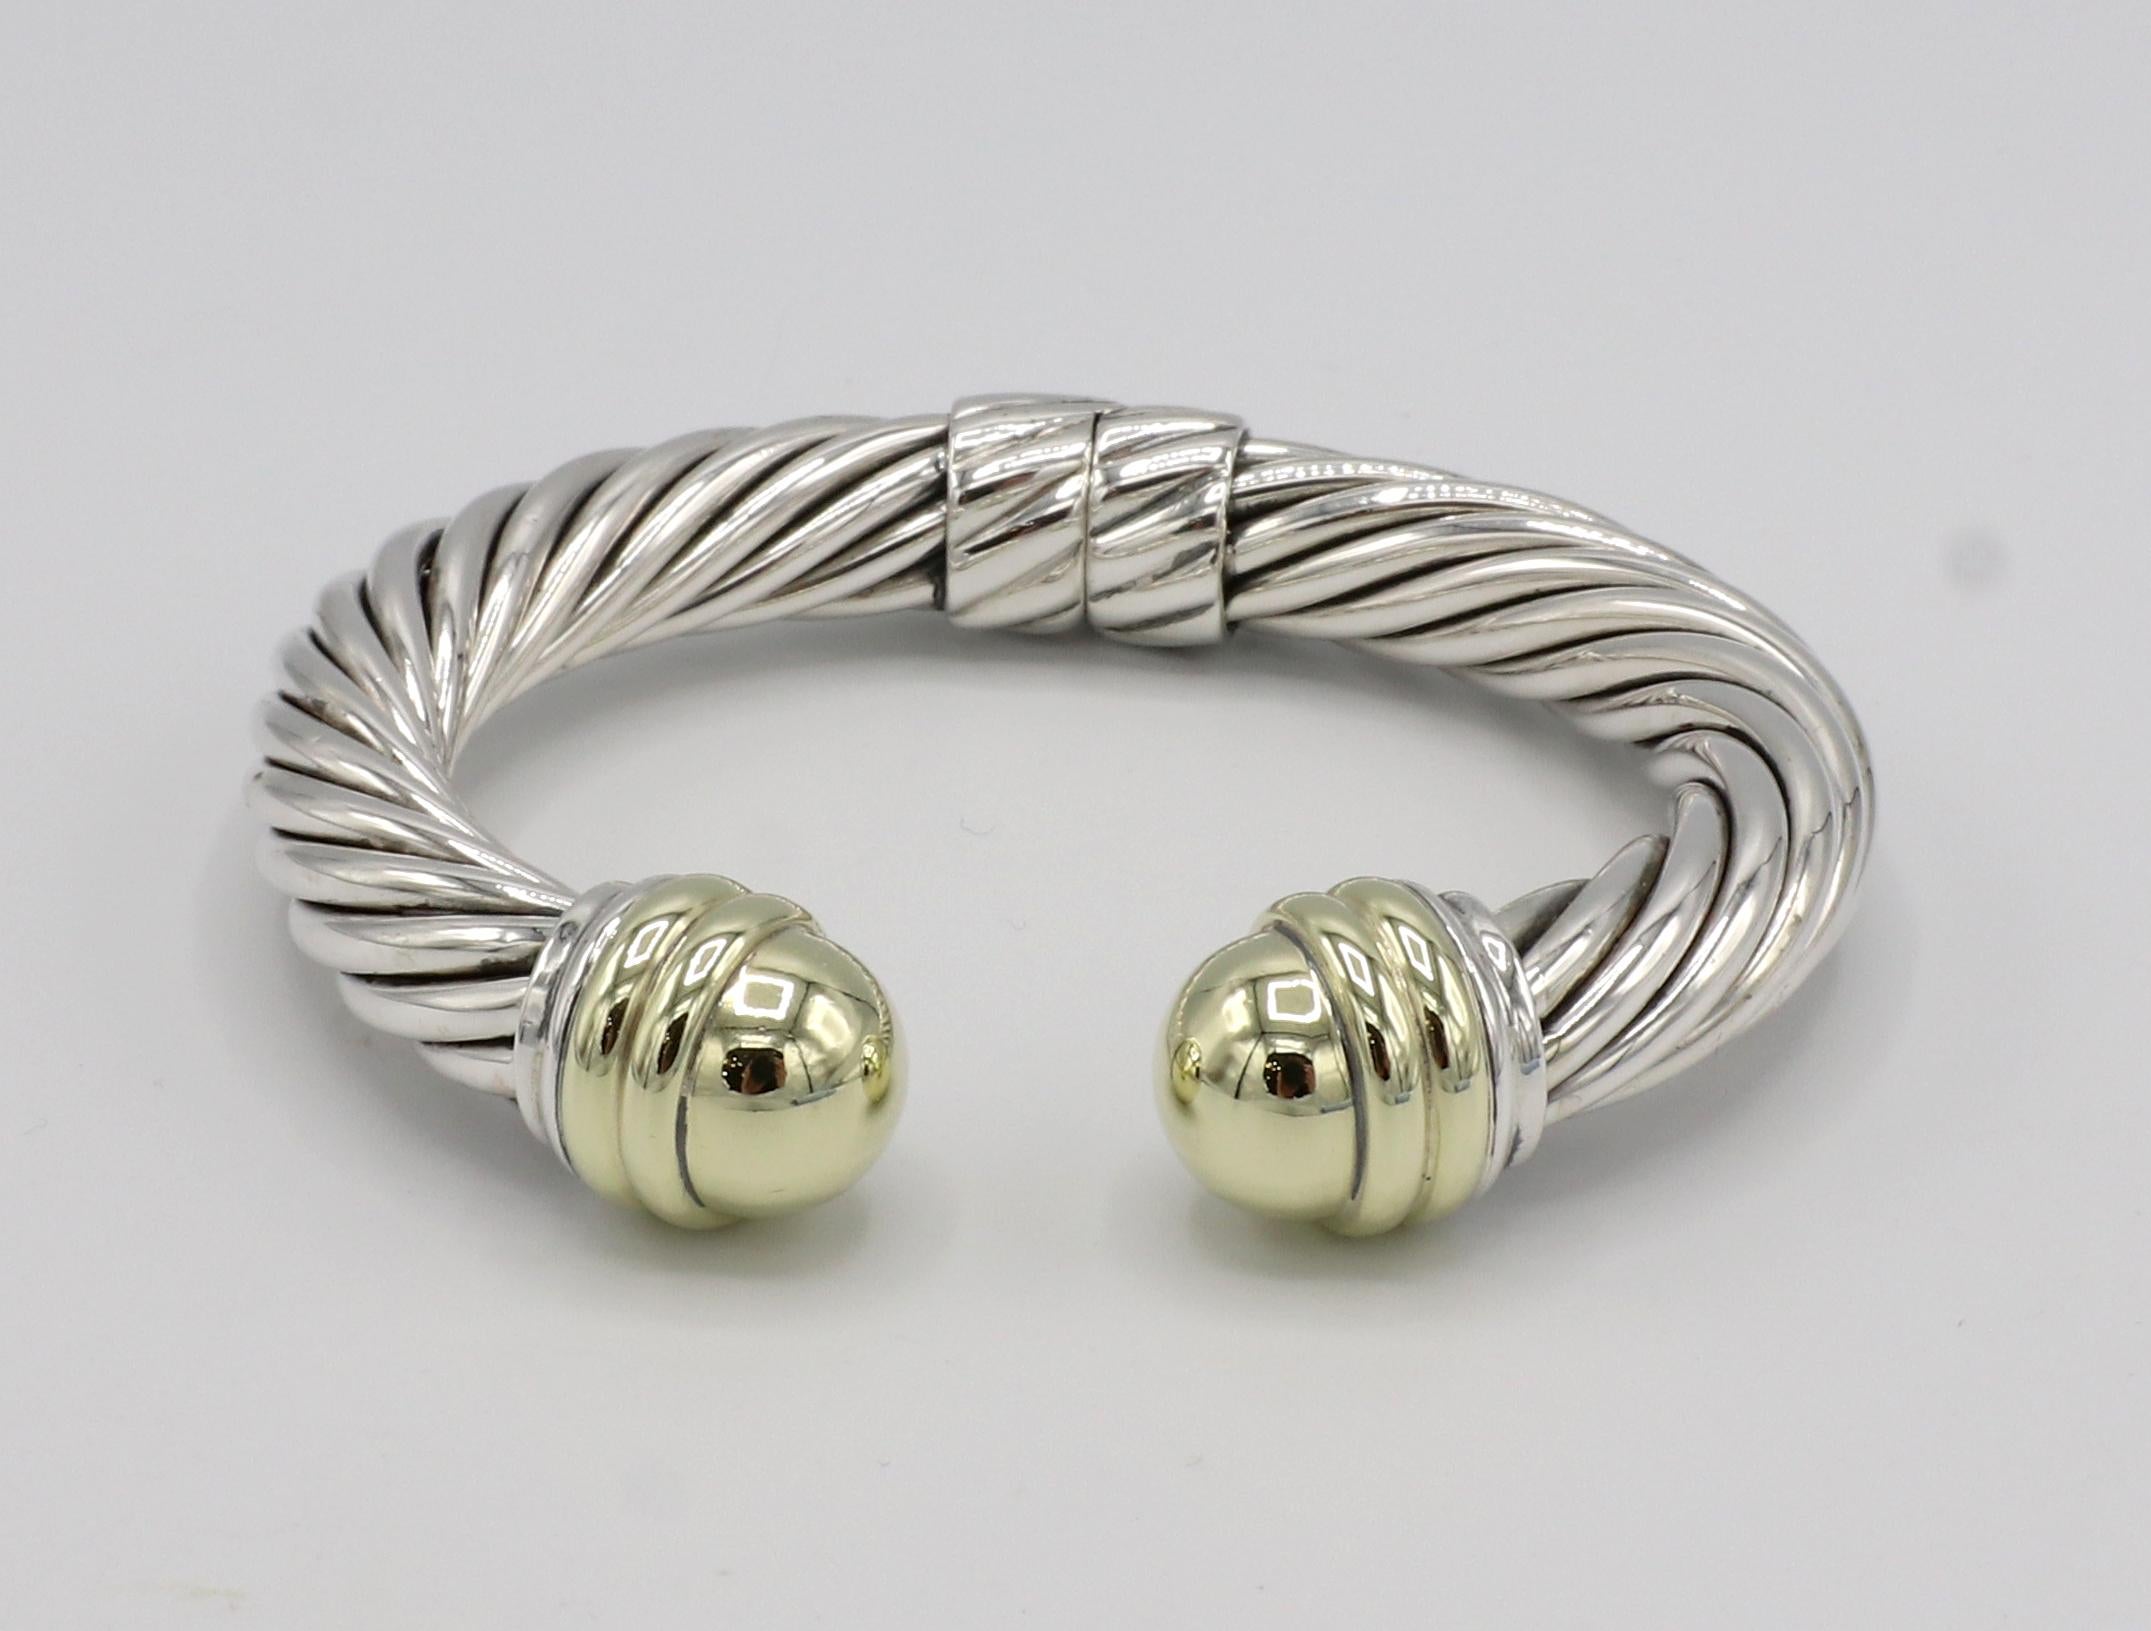 David Yurman Sterling Silver & Gold Hinged Cable Cuff Bangle Bracelet 
Metal: Sterling silver & 14k yellow gold
Weight: 48.5 grams
Width: 9.5mm
Inside diameter: 55mm
Outside diameter: 72mm
Circumference: Approx. 6.25 inches